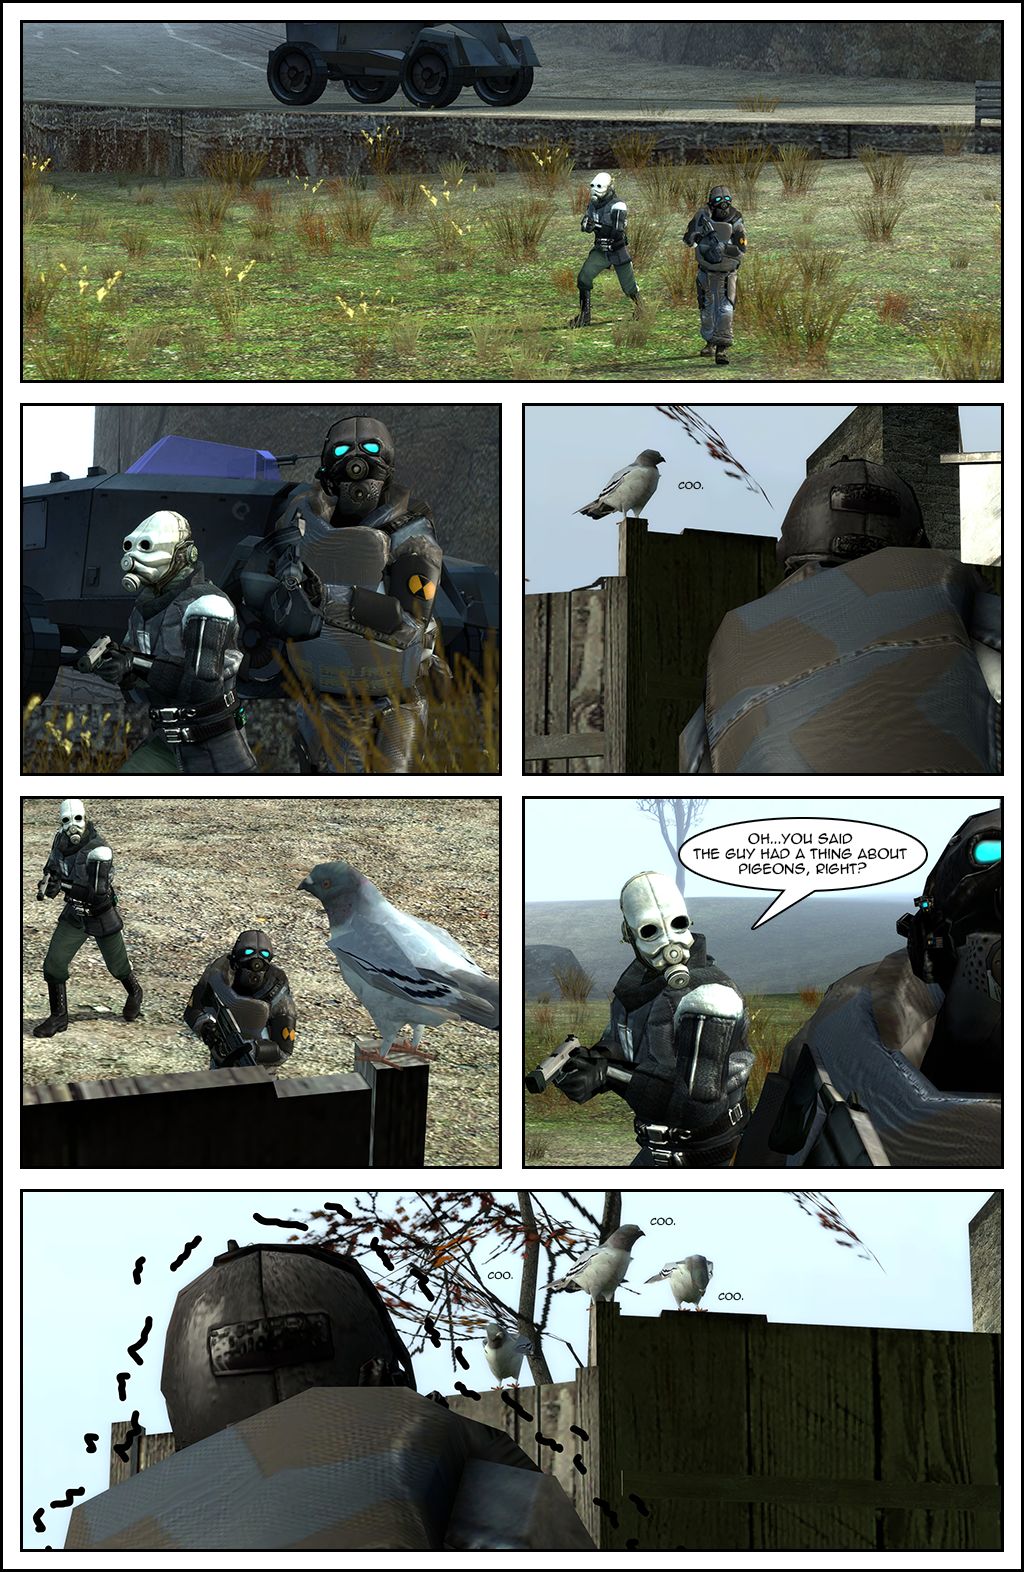 As the Civil Protection officer and the Overwatch soldier head towards the building, the soldier looks up and spots a pigeon sitting on a fence. He freezes as the cop looks up as well, then recalls that the soldier said the guy had a thing about pigeons. Two more pigeons then appear and the soldier starts to shake visibly.